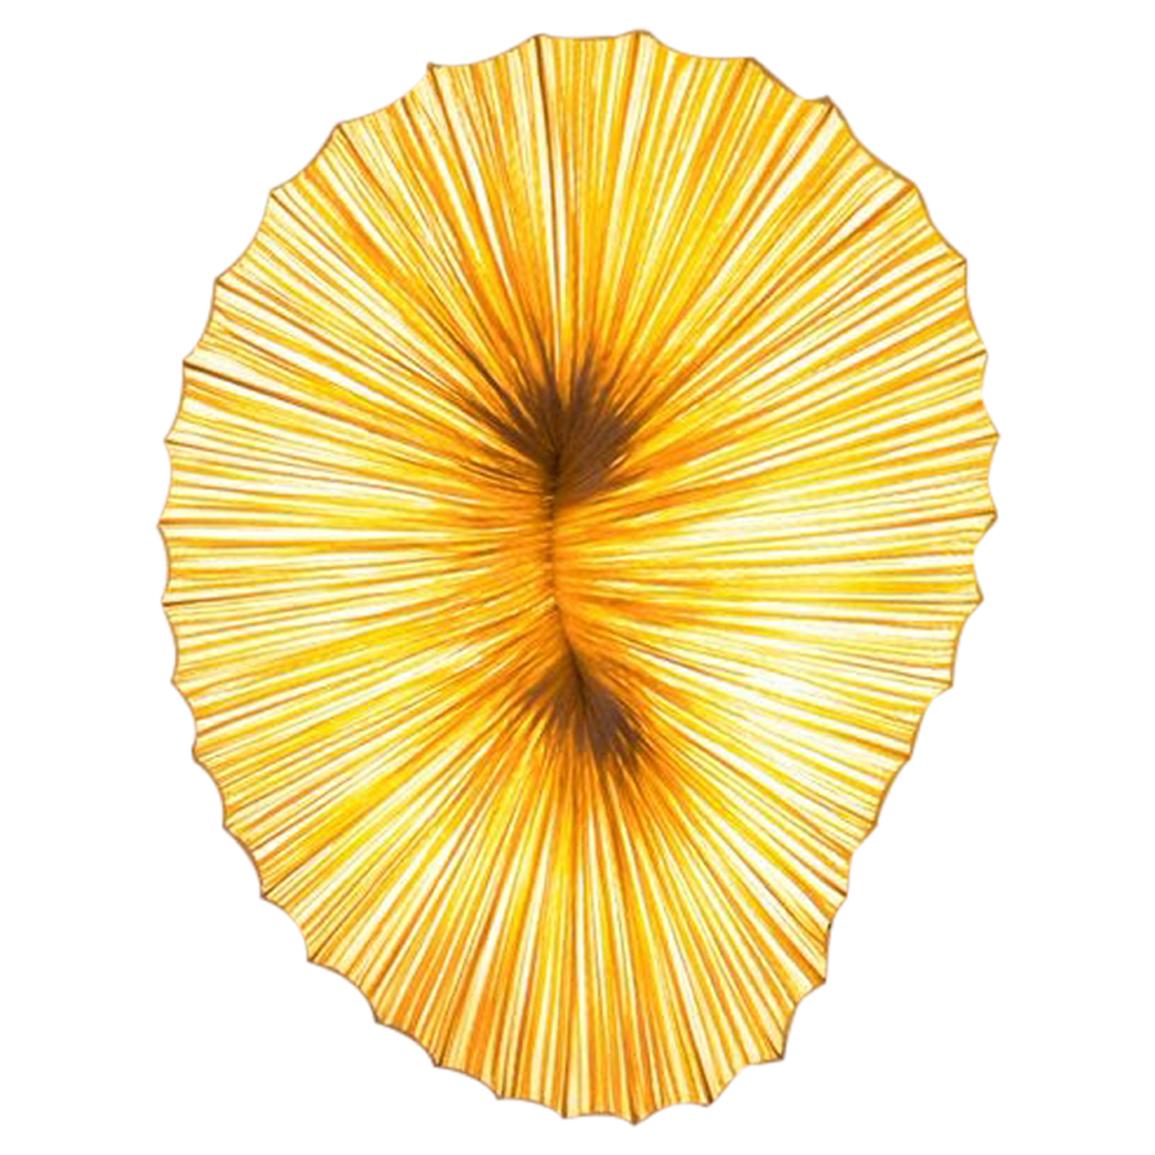 Silk over Metal "Coral" Wall & Ceiling Lamp by Aqua Creations For Sale